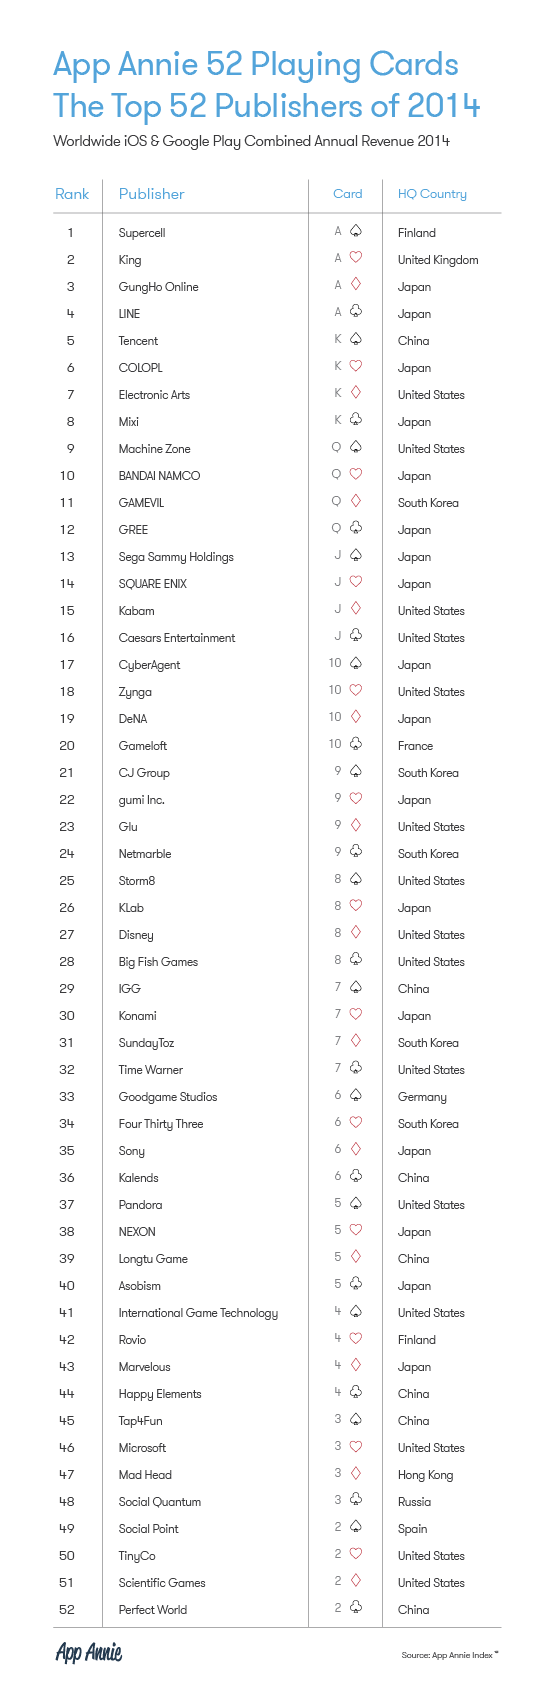 App Annie Index Top 52 Publishers of 2014 Table